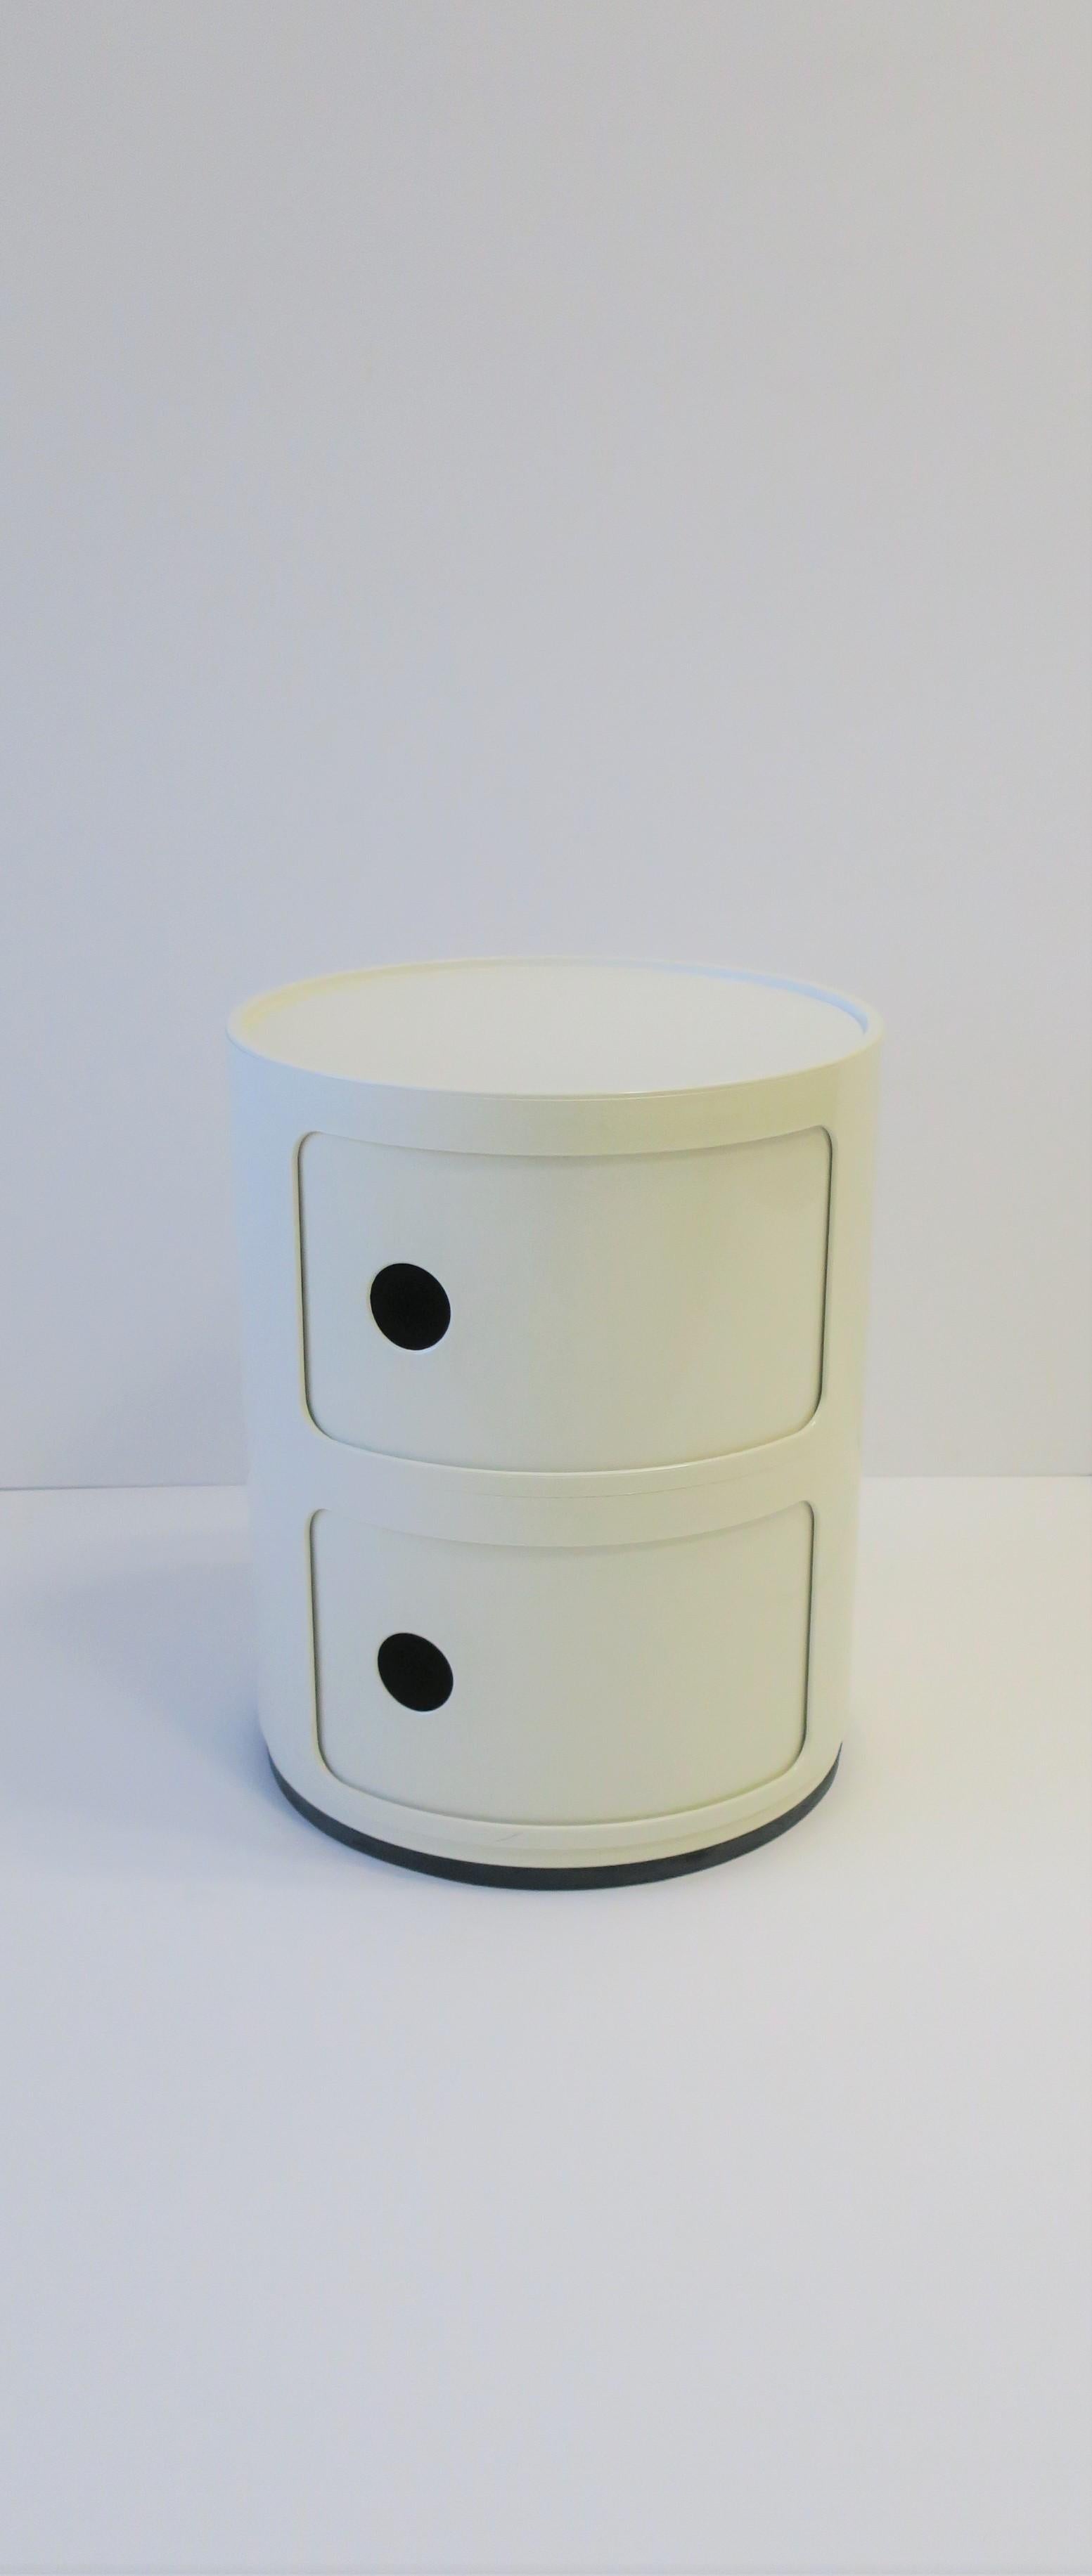 A vintage designer Italian Postmodern white Kartell 2-tier storage cabinet piece designed in the late 20th century by Anna Castelli for Kartell. Made in Italy. This iconic vintage storage piece, aka the Componibili, has two storage areas with